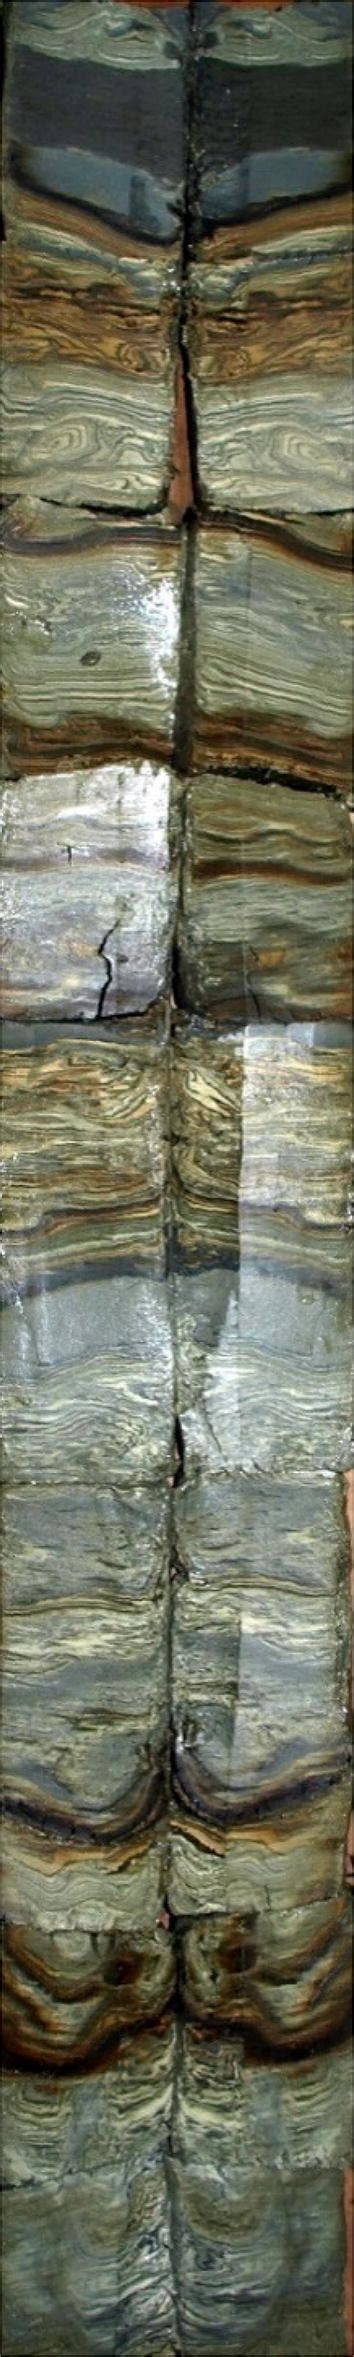 Upper Lisan Laminated Lime Carbonate Sediments With Organic And Iron